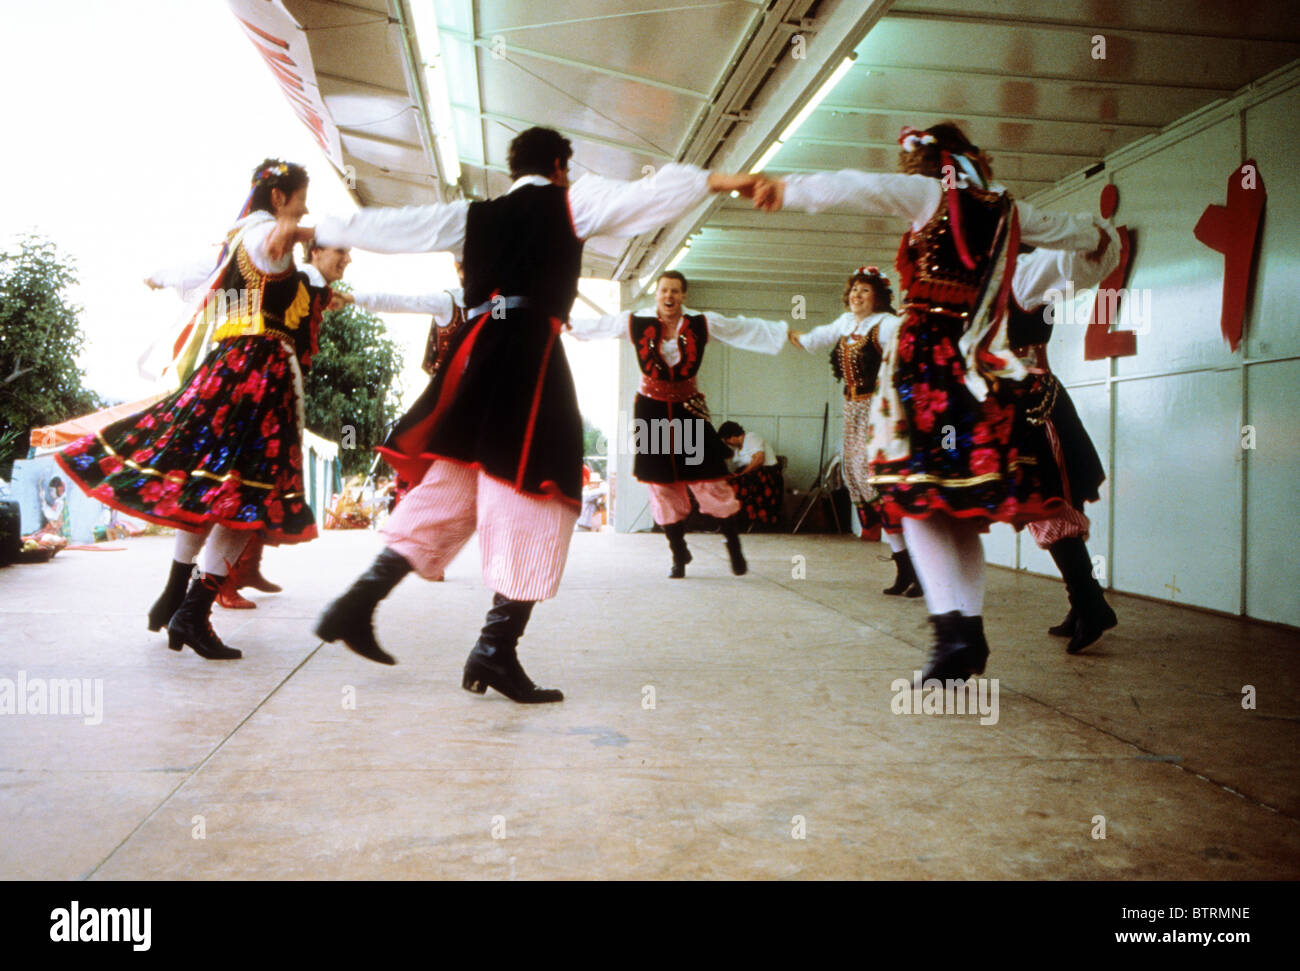 Polish folk dance stage perform culture cultural costume color boot historic exhibit demonstration fair event fiesta carnival Stock Photo